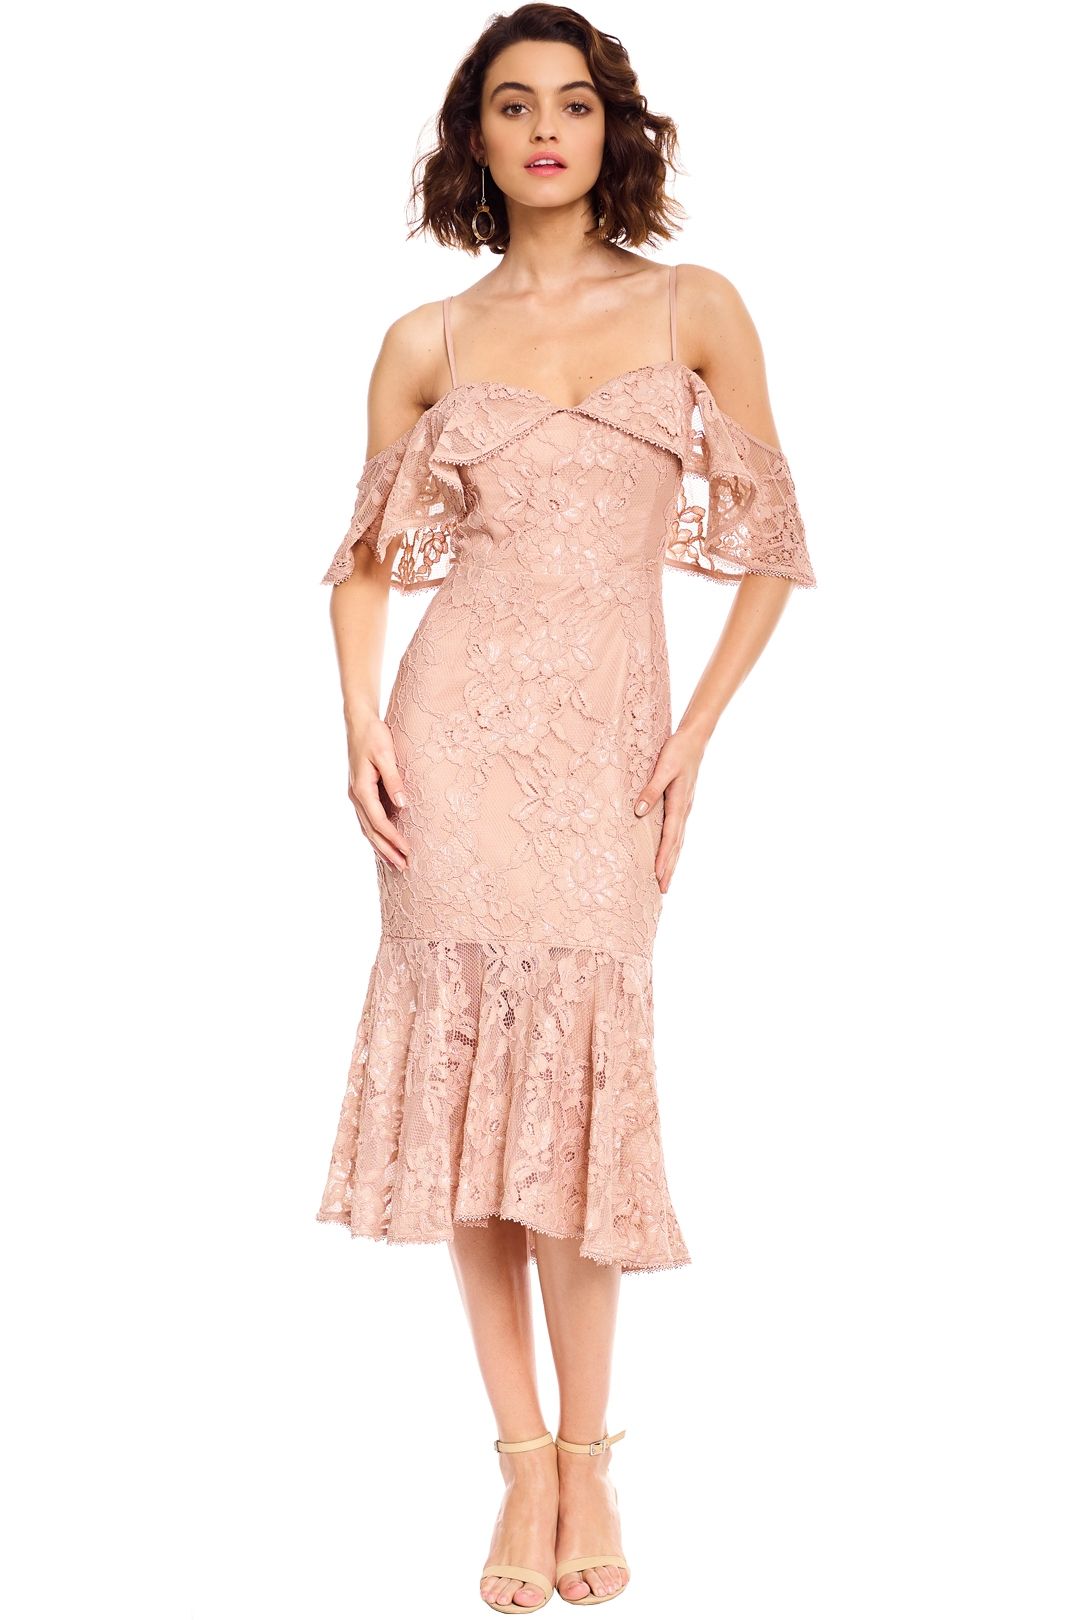 Rodeo Show - Manuela Lace Dress - Nude - Front